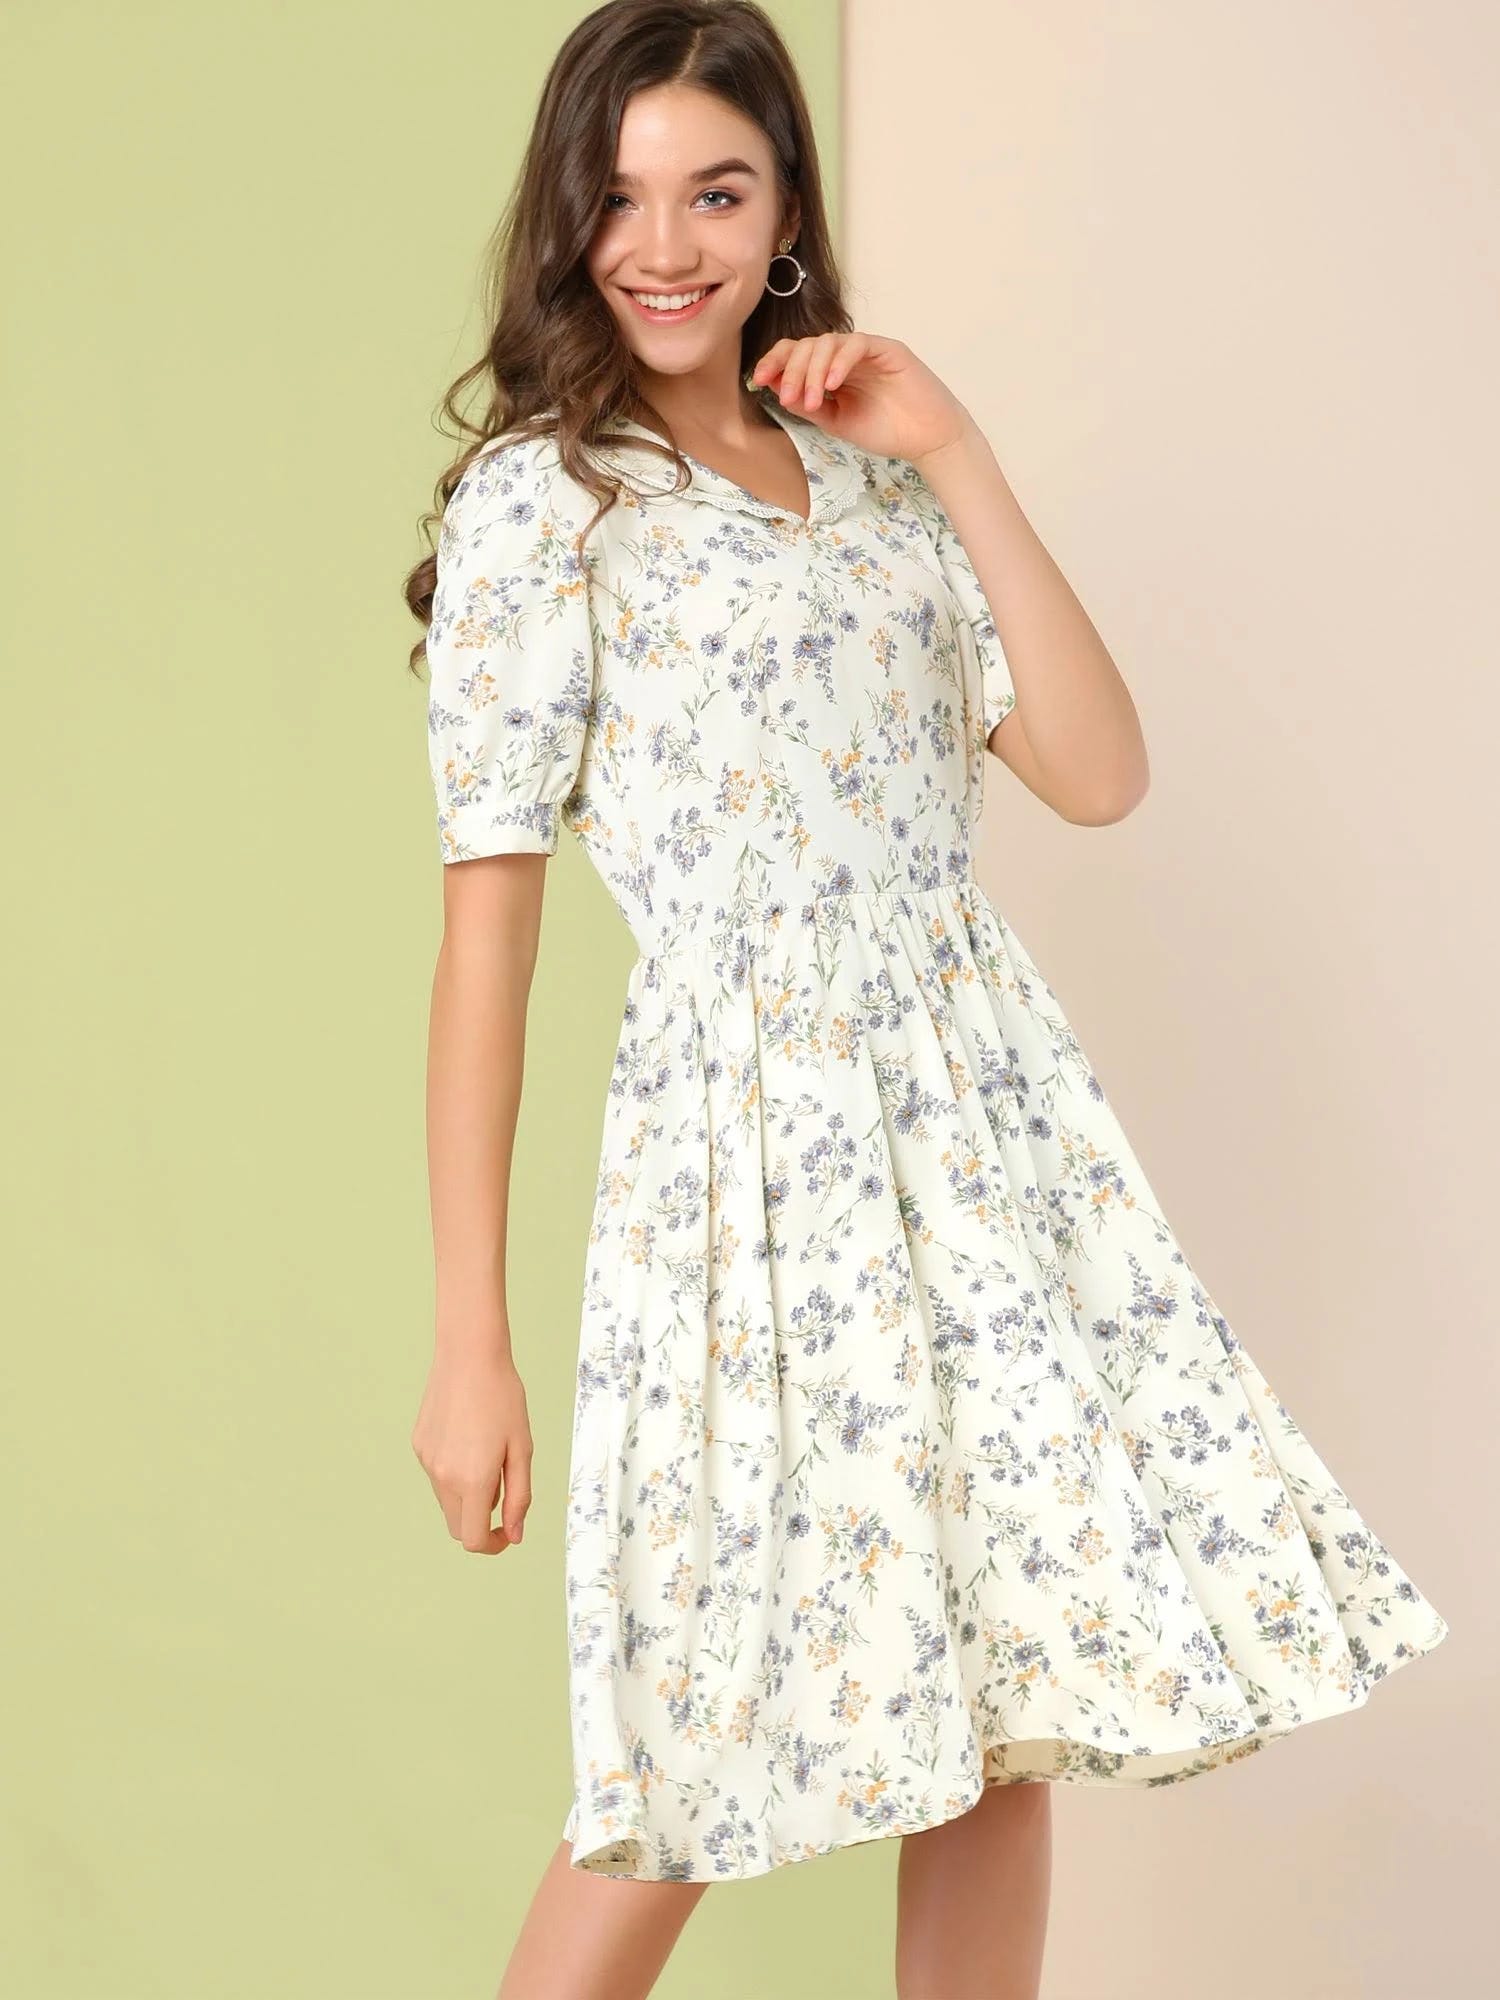 Lightweight Floral Midi Dress for Wedding Guest | Image